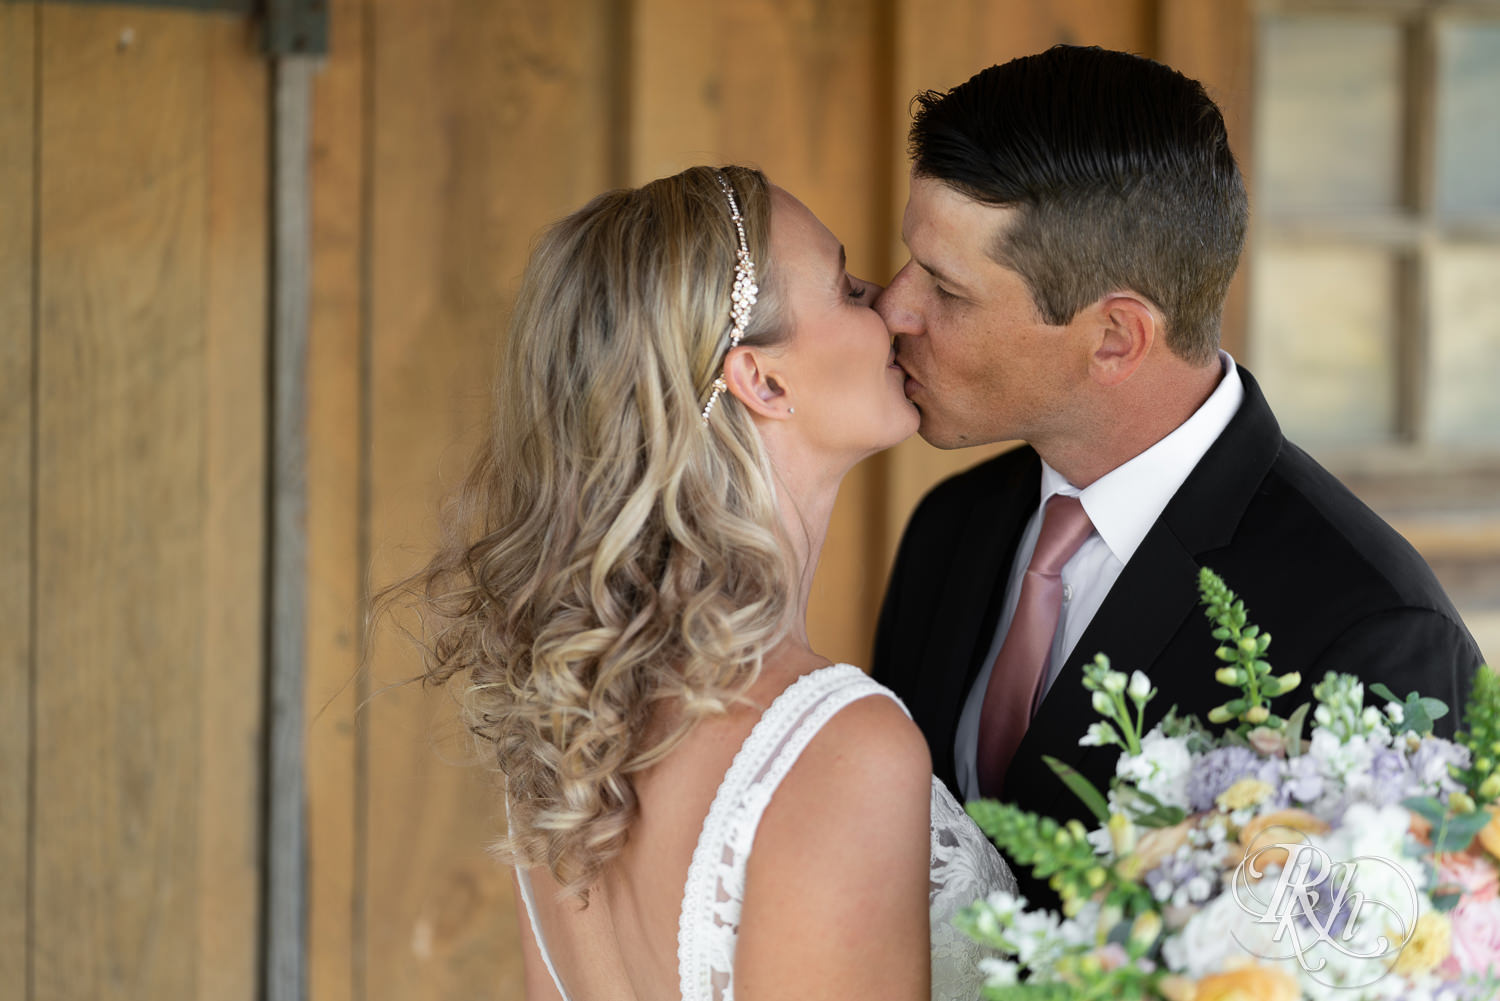 Bride and groom kiss at The Outpost Center in Chaska, Minnesota.